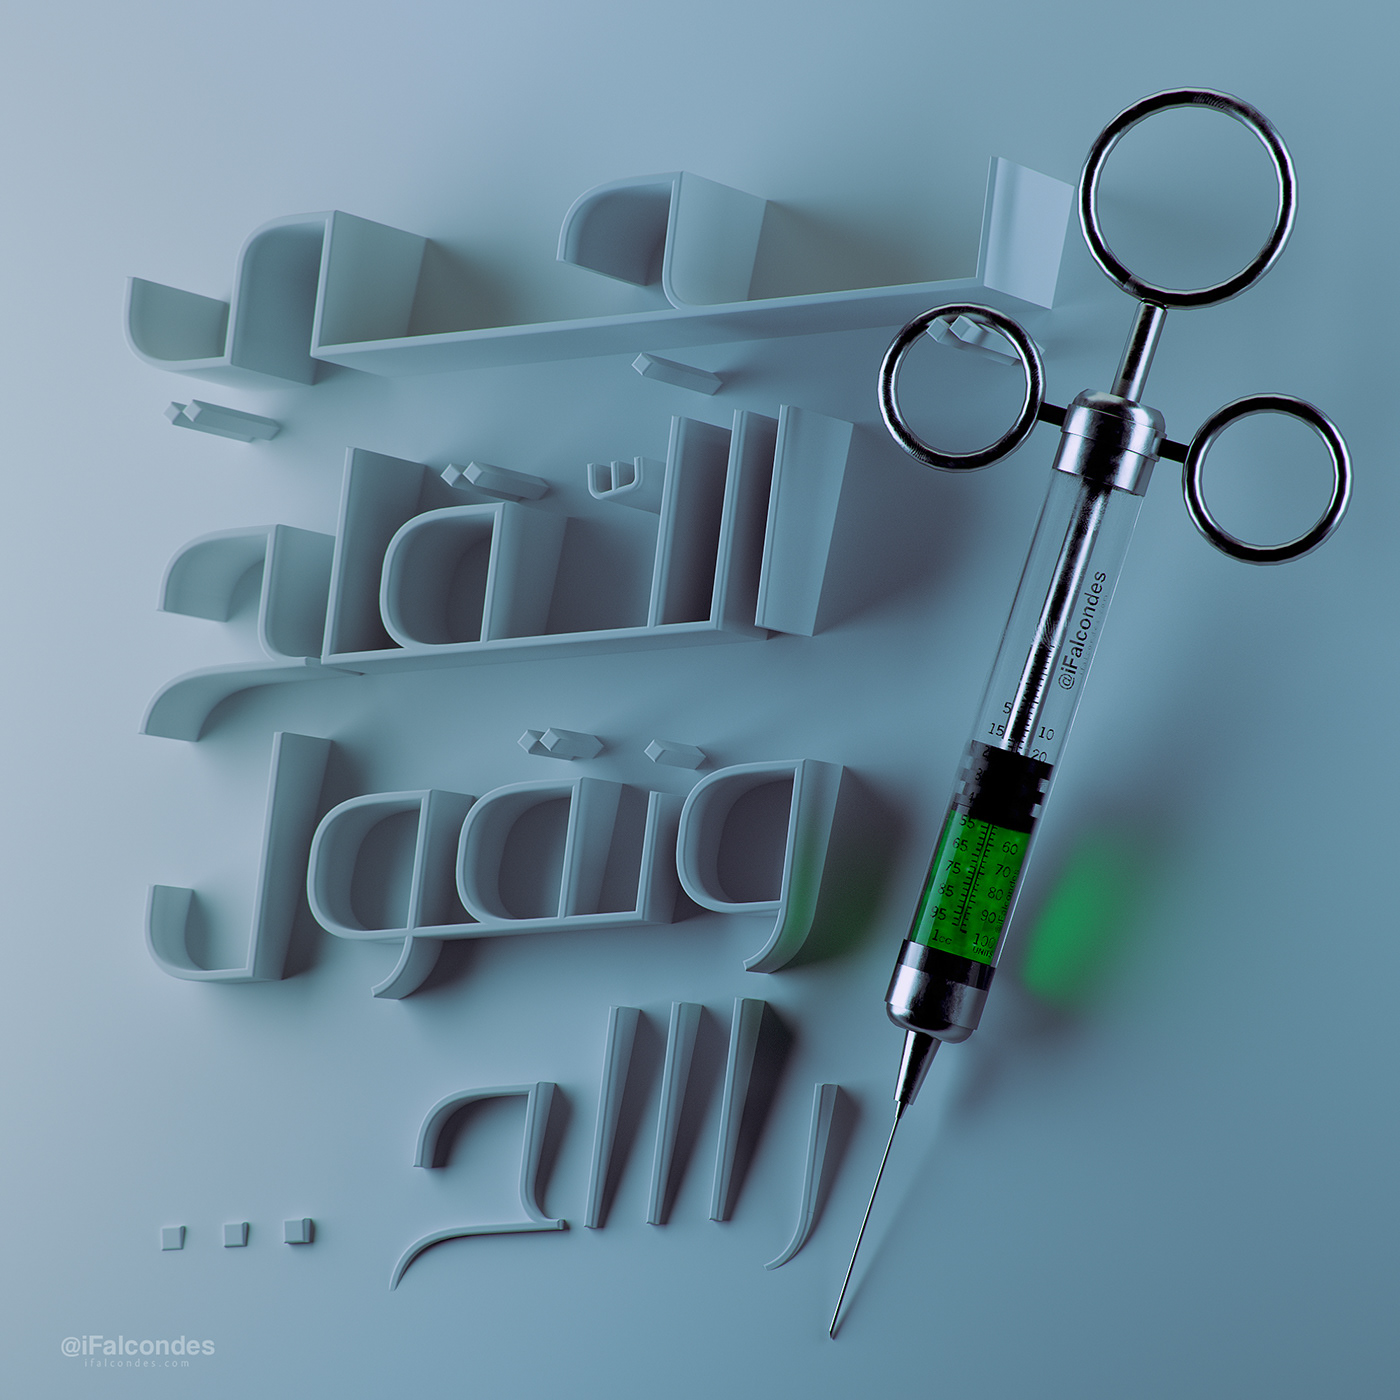 @ifalcondes 3D COVid falcon iFalcondes OCTAN substance vaccine فالكون